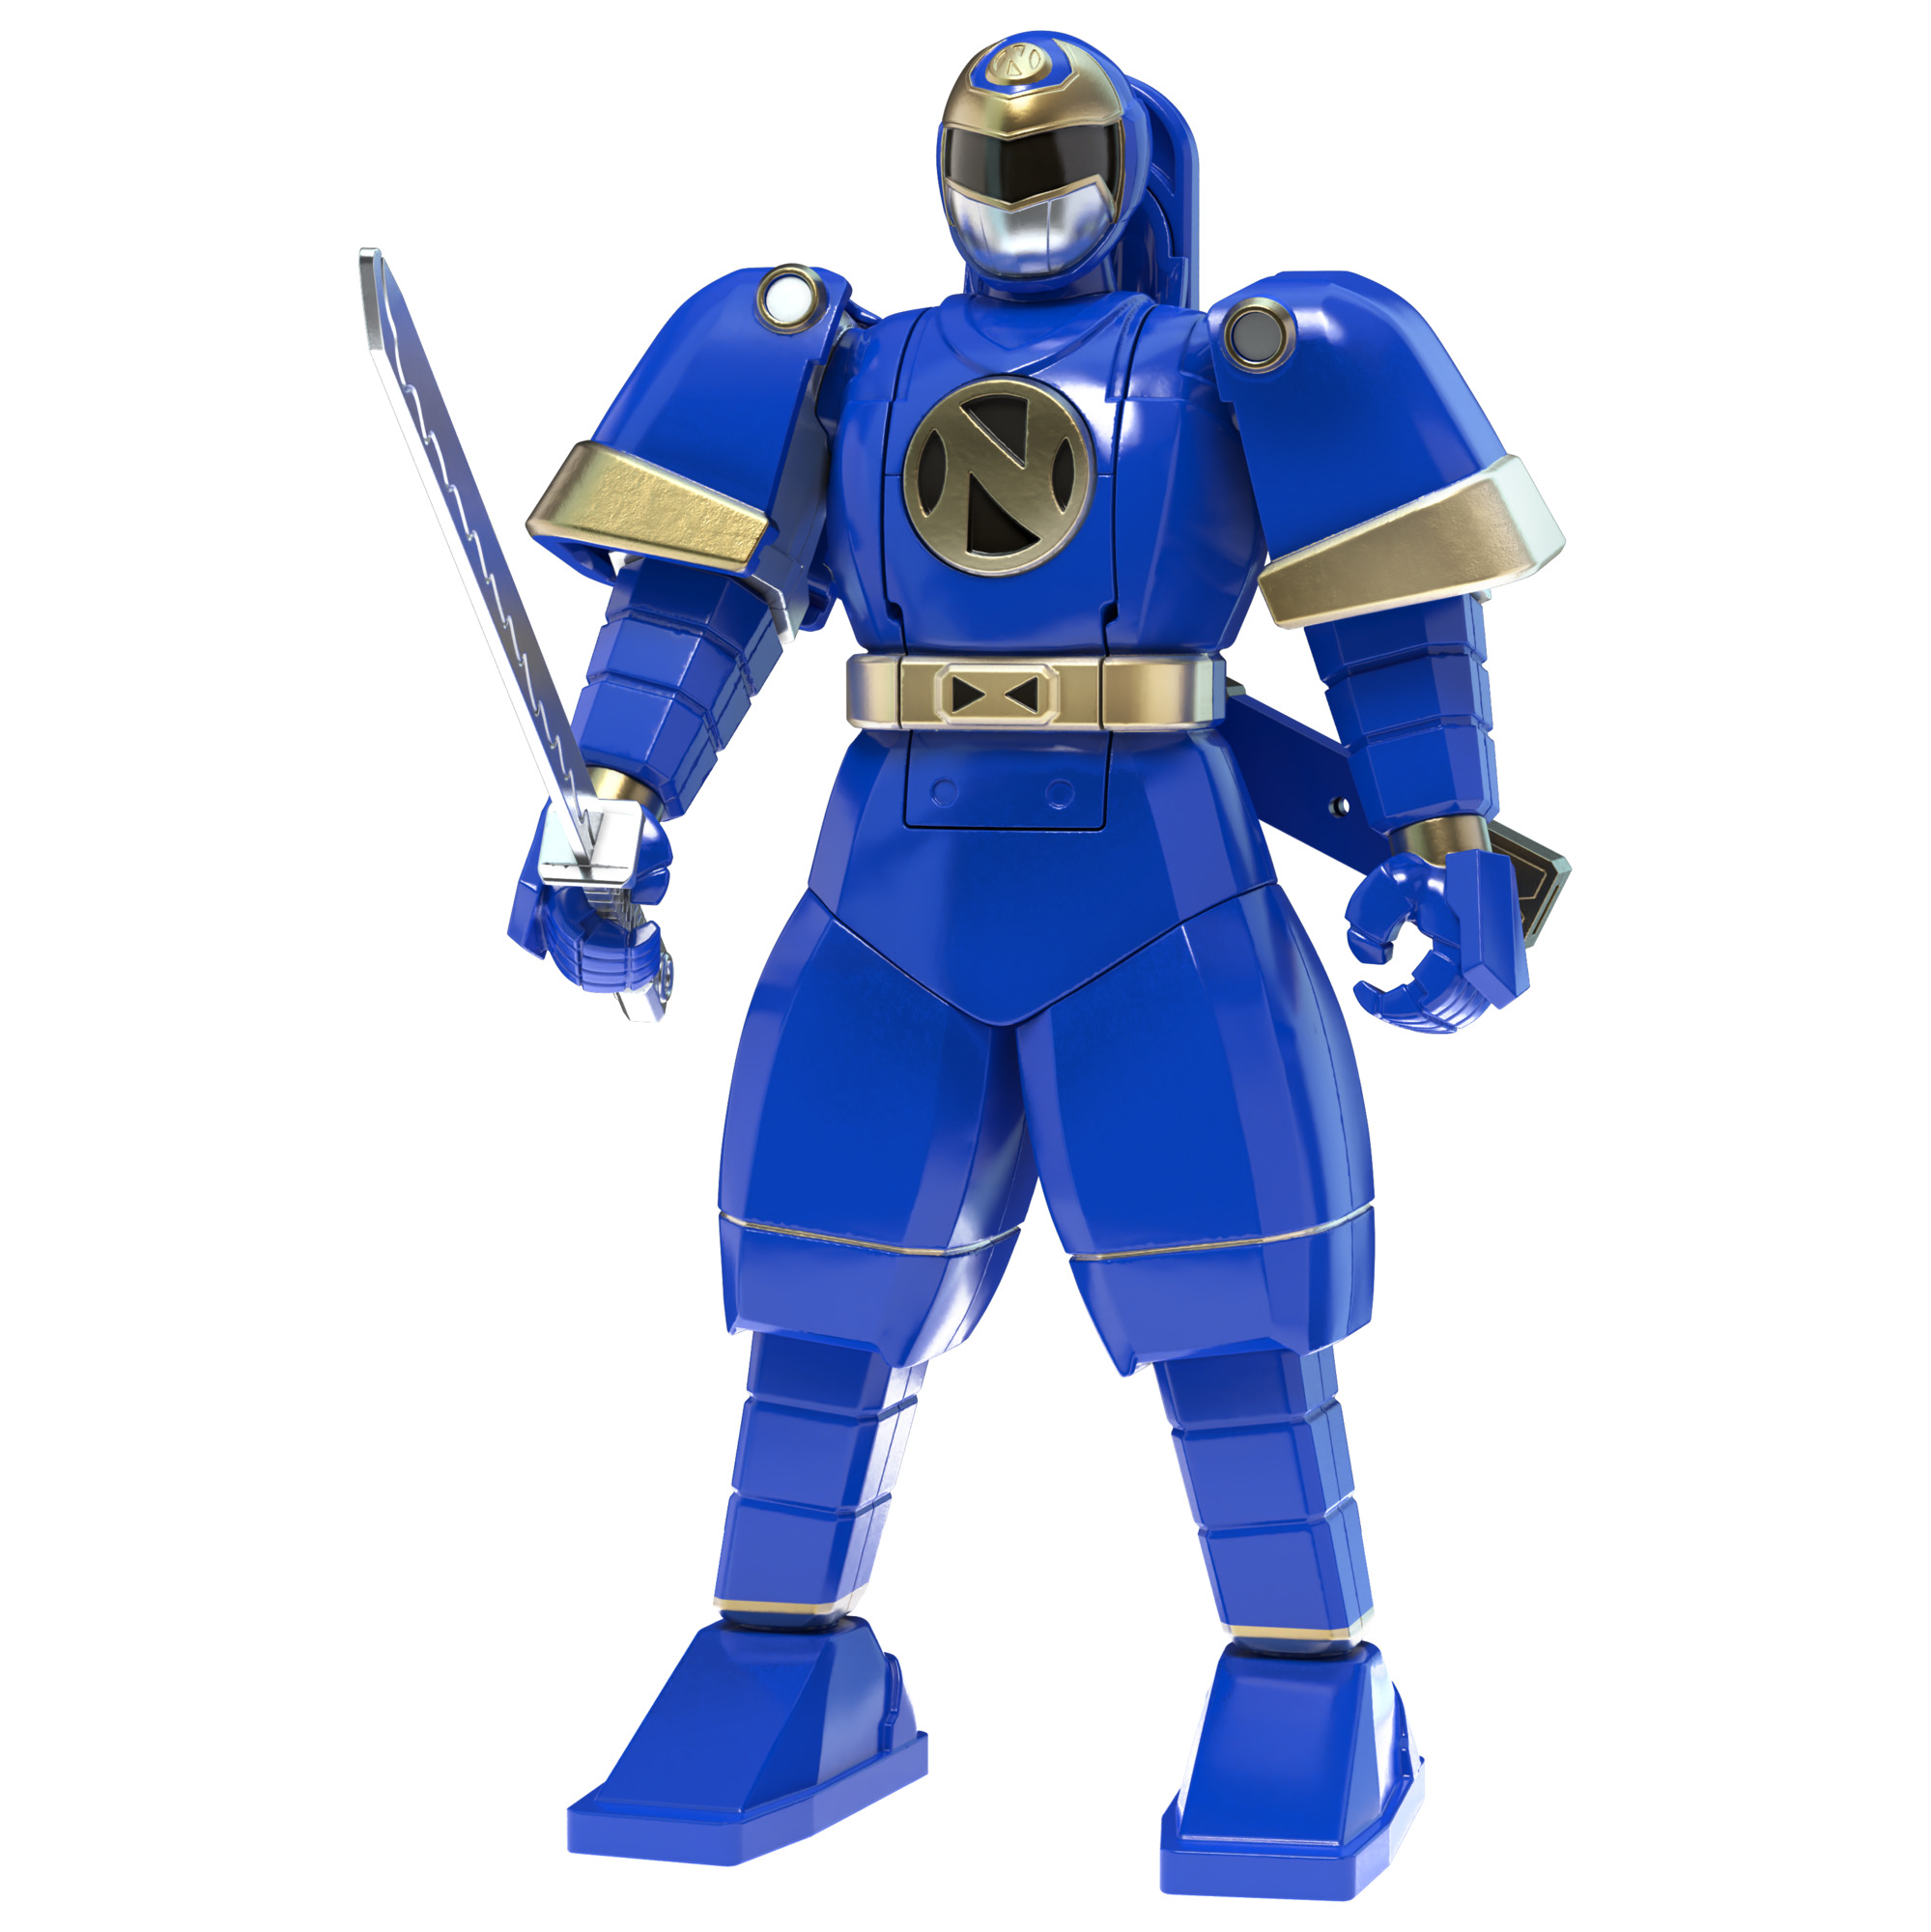 Power Rangers: Mighty Morphin Retro-Morphin Ninjor Toy Action Figure for Boys and Girls Ages 4 5 6 7 8 and Up (6”) - image 2 of 4